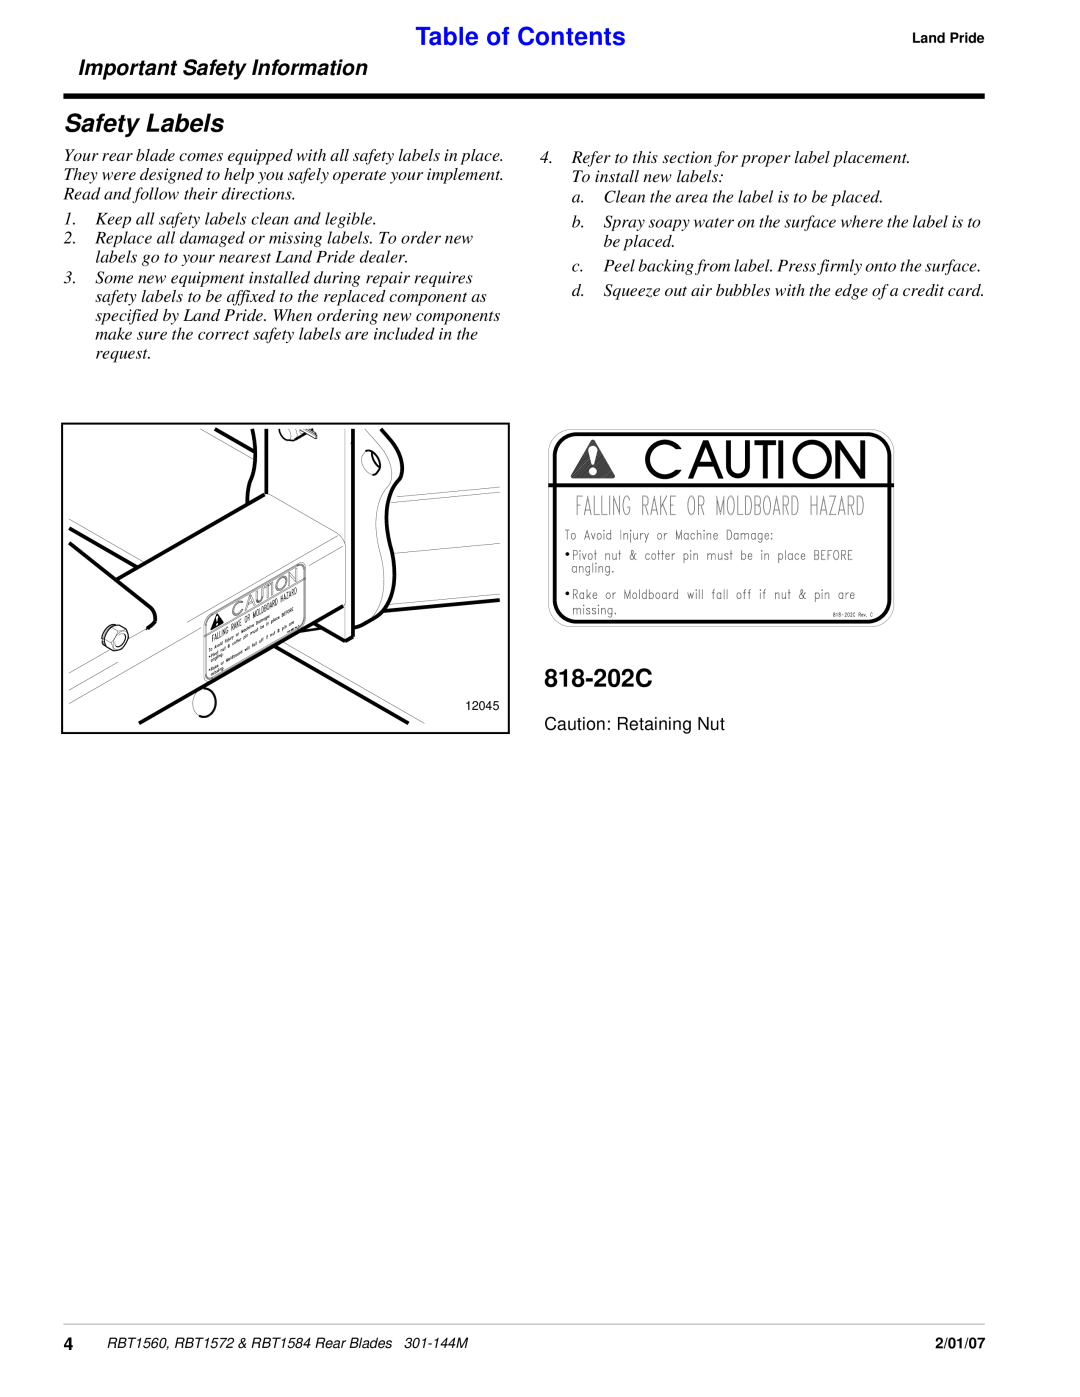 Land Pride Rear Blades, RBT1560, RBT1572 & RBT1584 Safety Labels, 818-202C, Table of Contents, Important Safety Information 